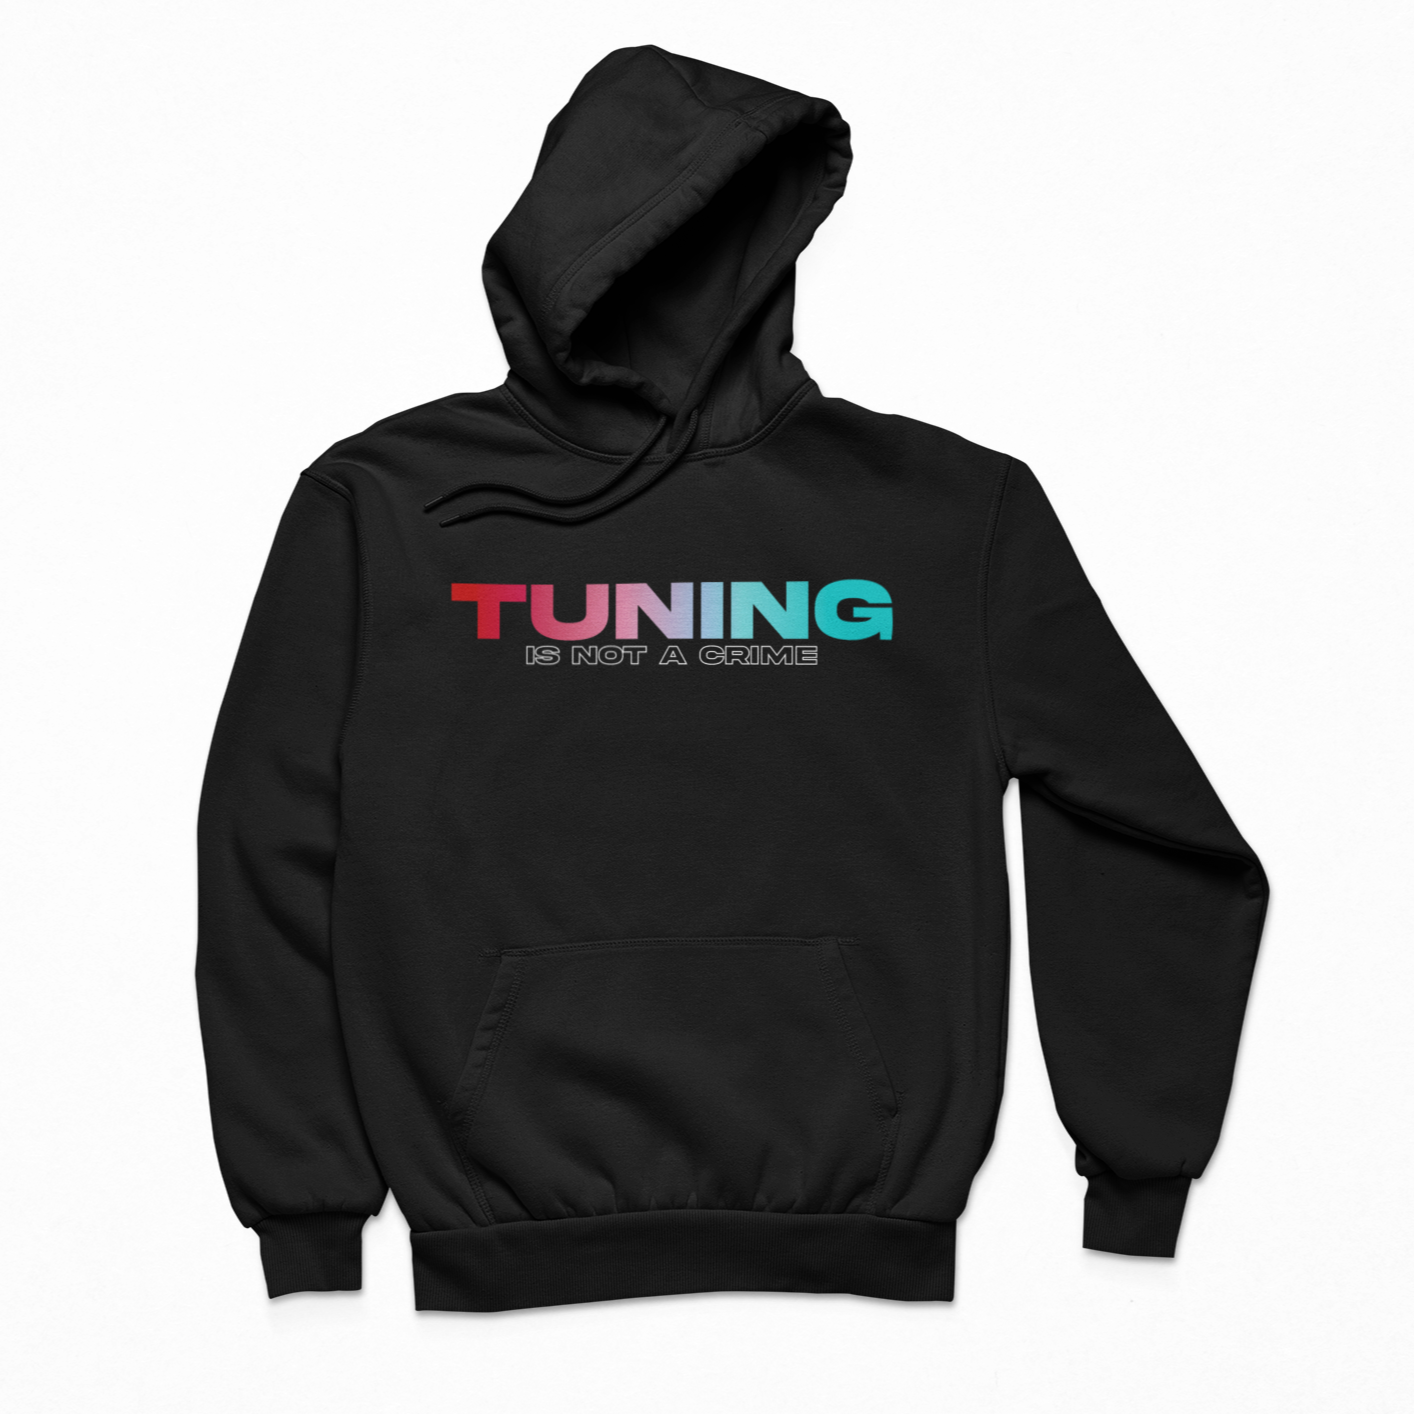 Tuning is not a crime - Unisex Hoodie